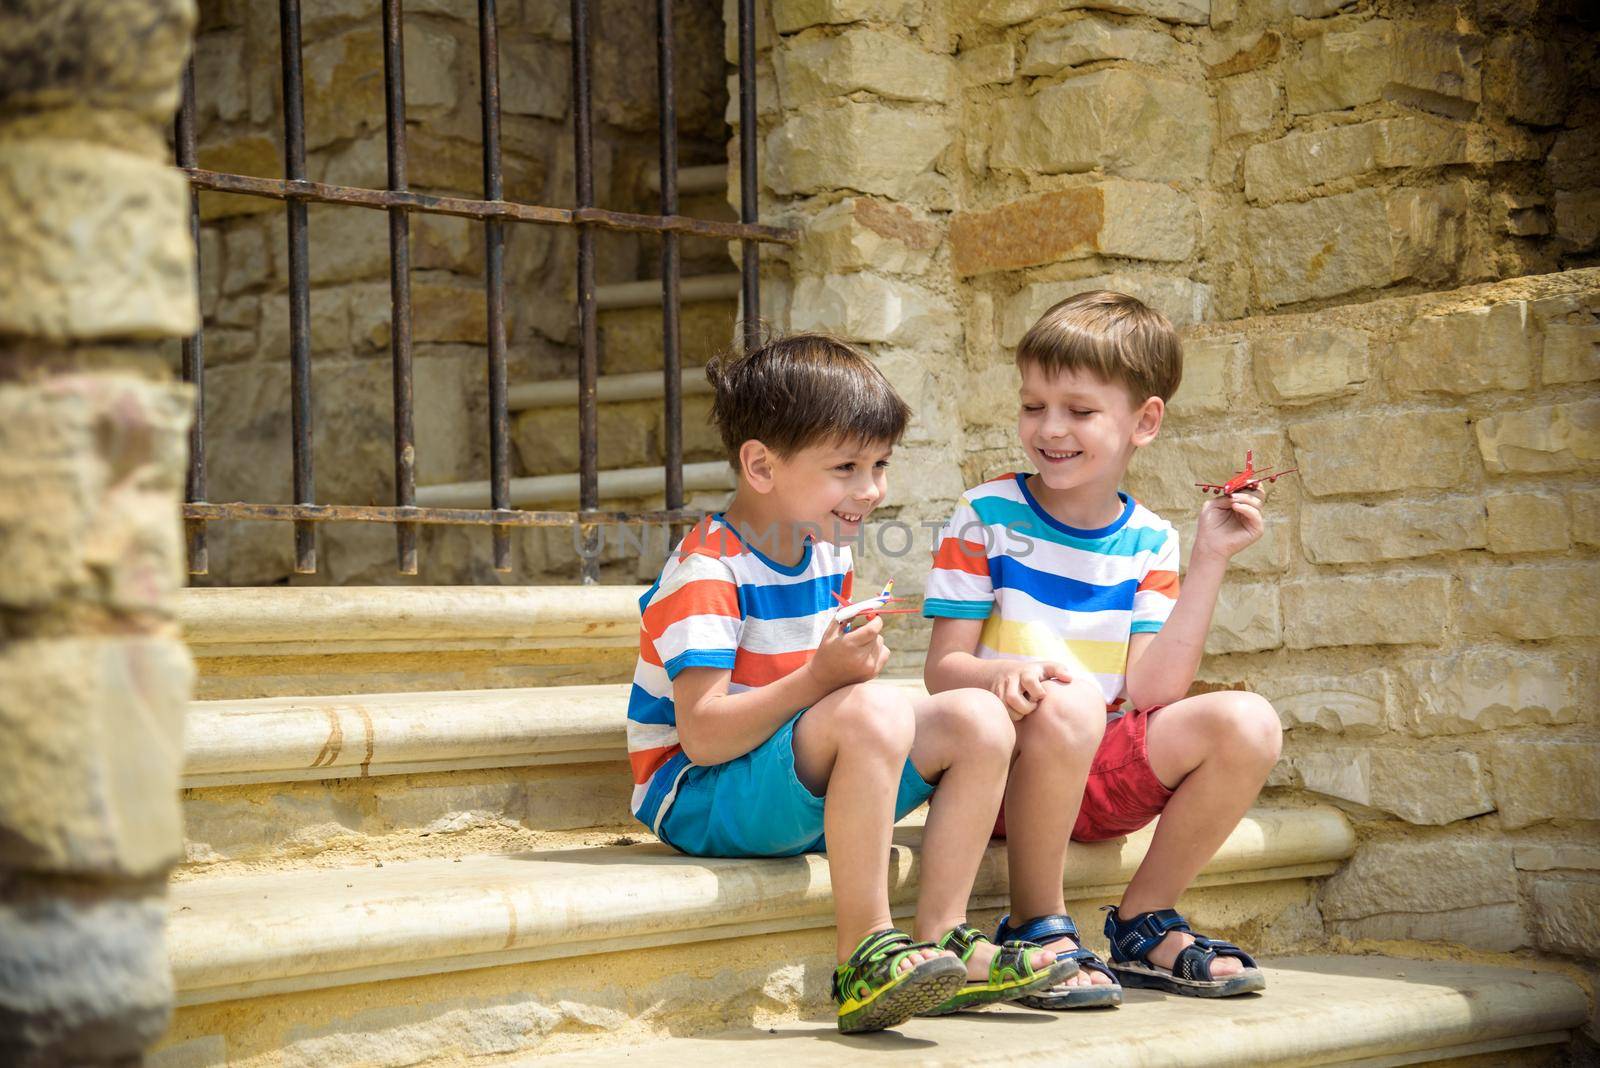 The children playing on the ruins of ancient building with metal gate an archaeological site of an ancient city. Two boys sitting and play with toy aircraft plane. Travel concept.